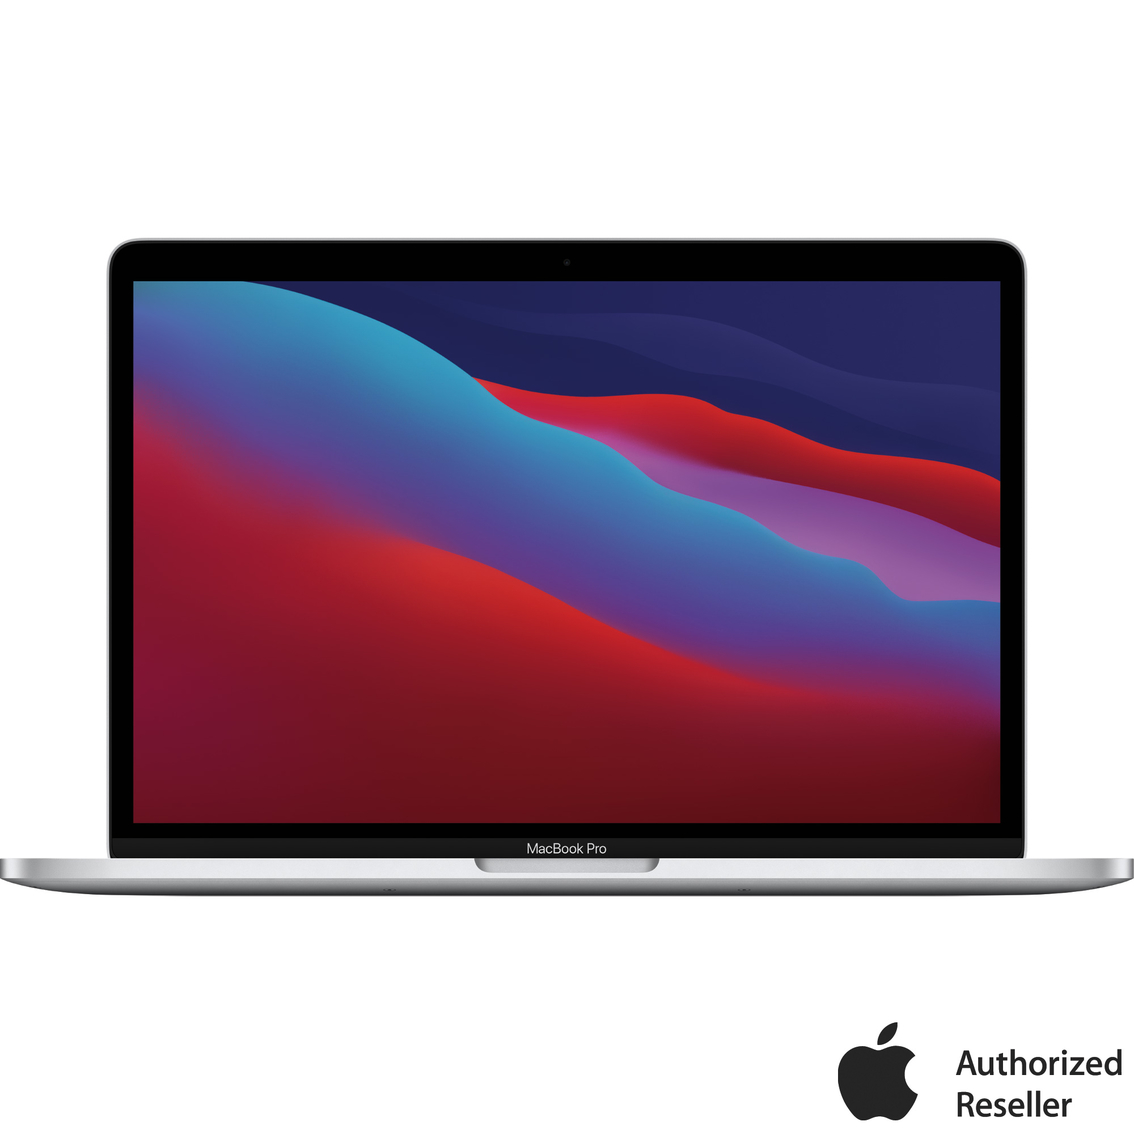 Apple MacBook Pro 13 in. with M1 Chip with 8-Core CPU and GPU 8GB RAM 512GB SSD